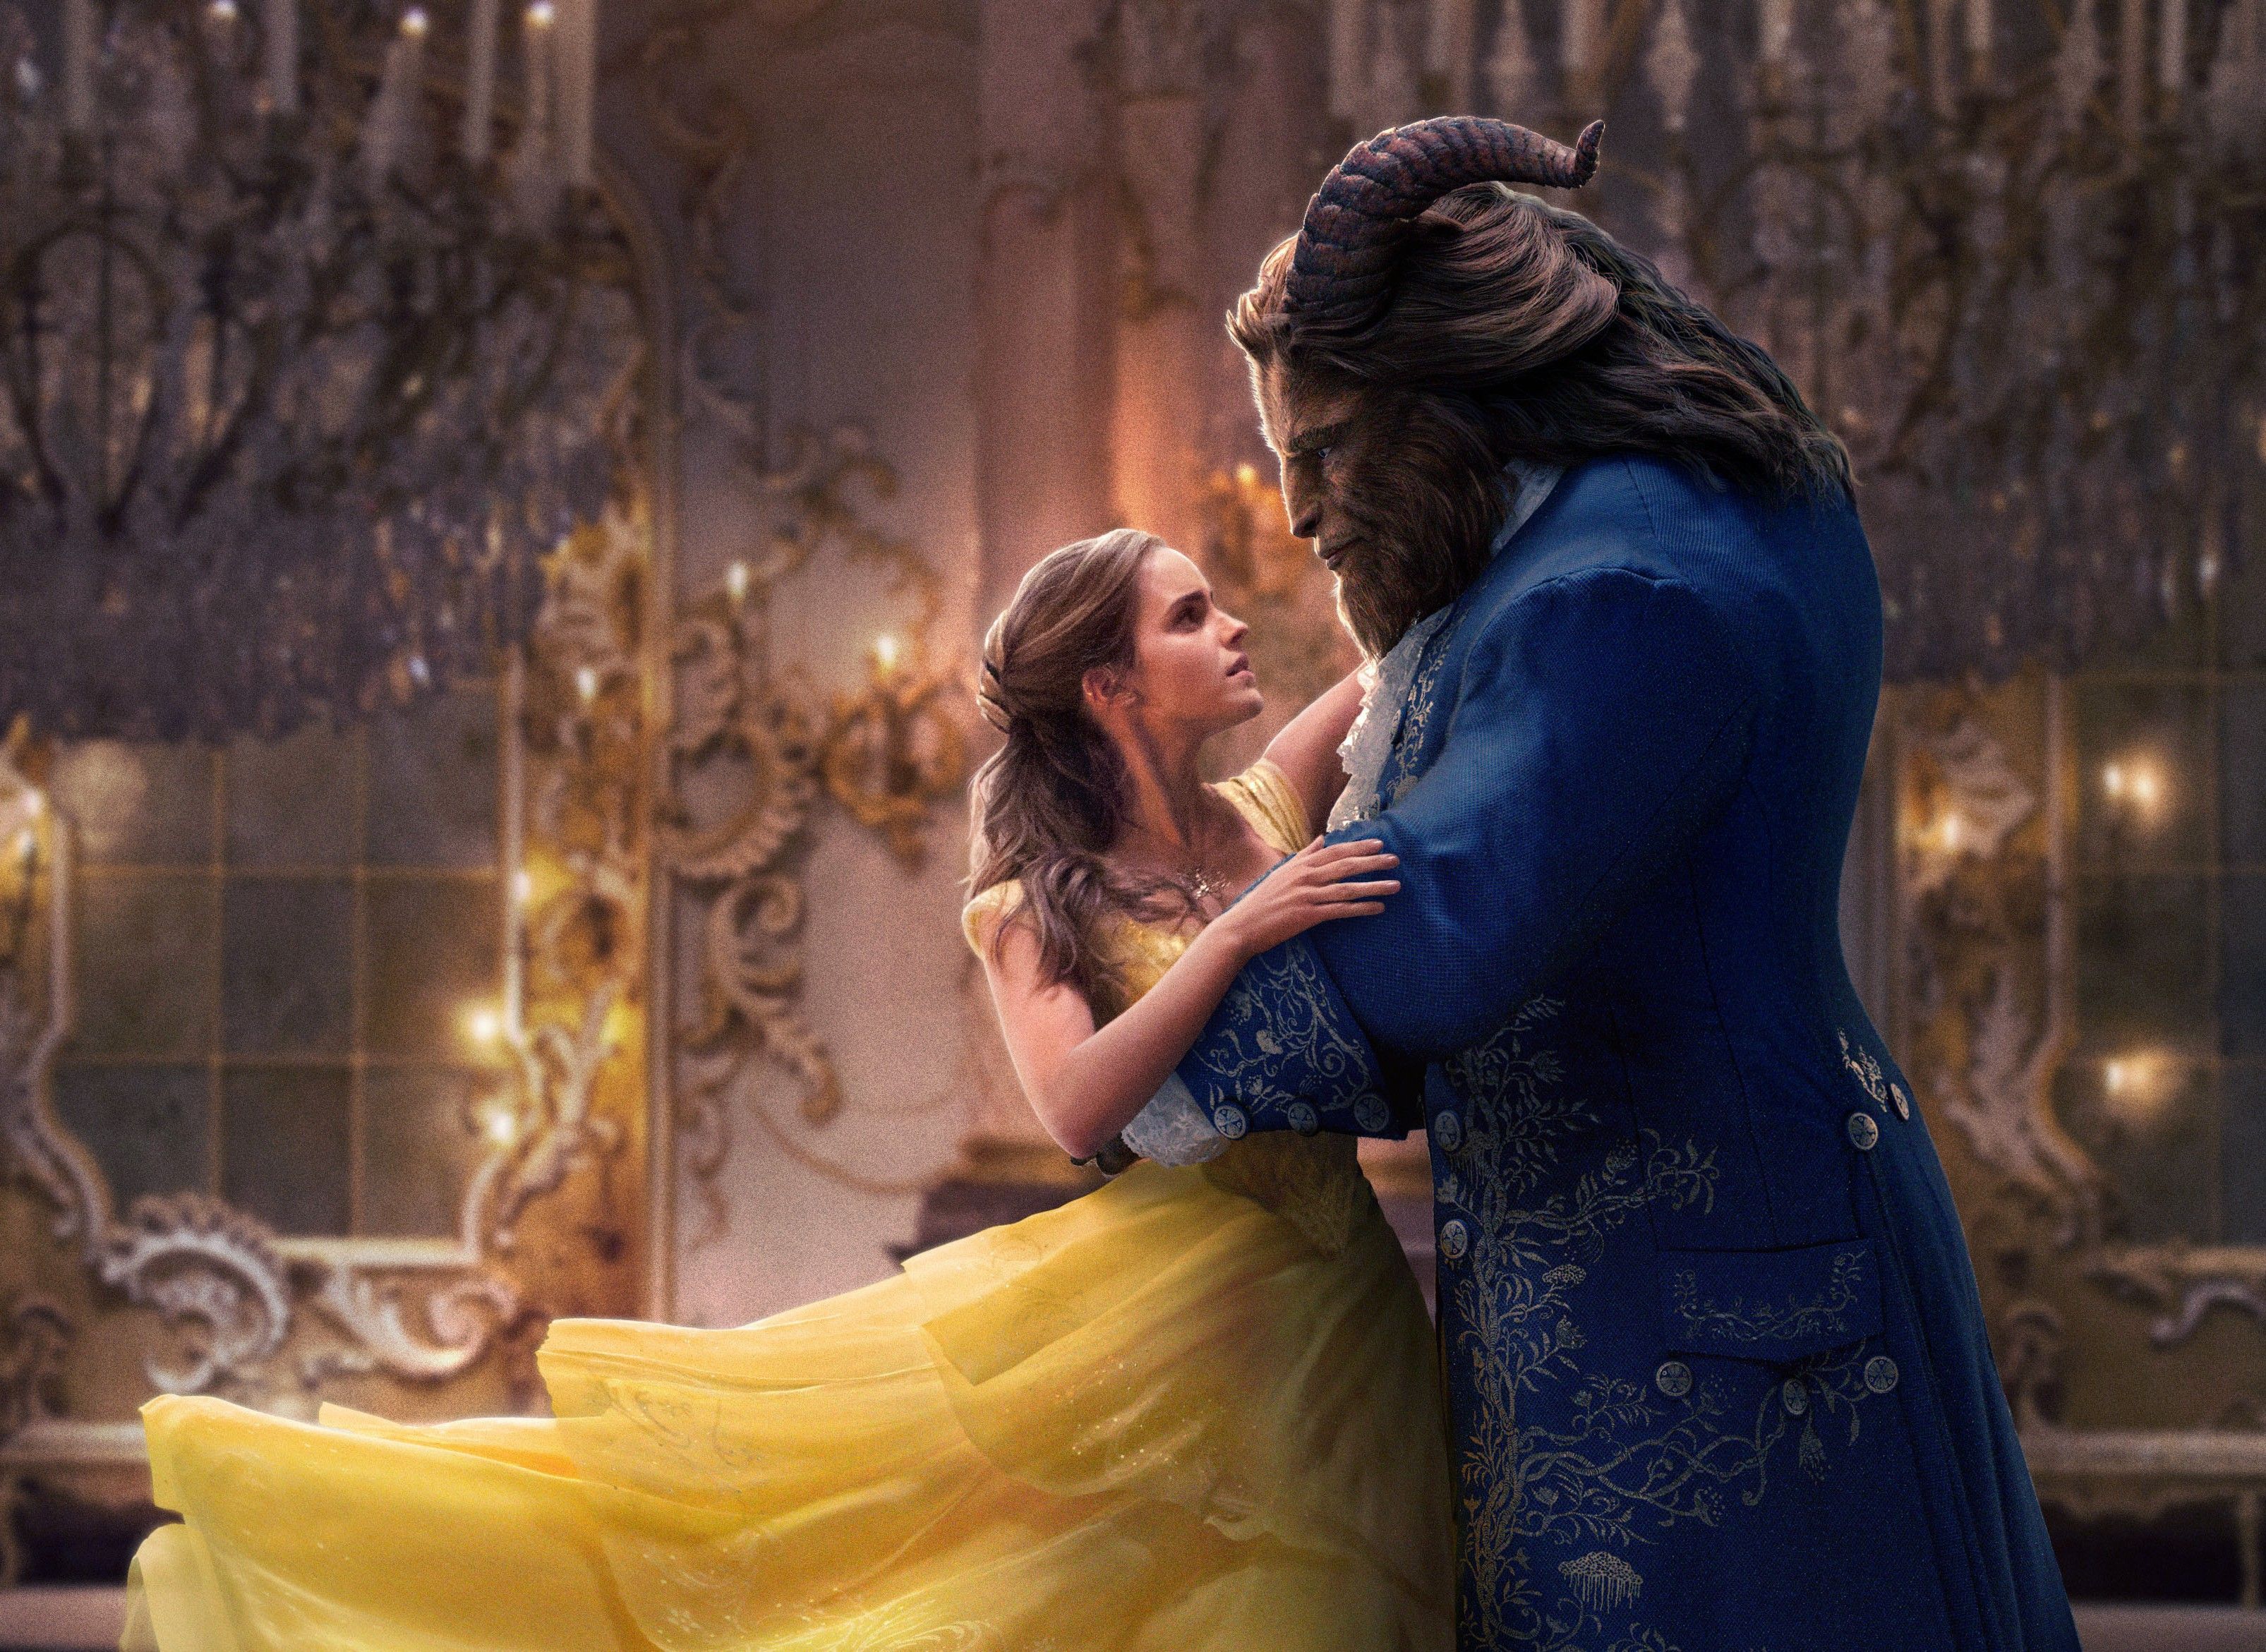 Beauty And The Beast Wallpaper Wallpaper